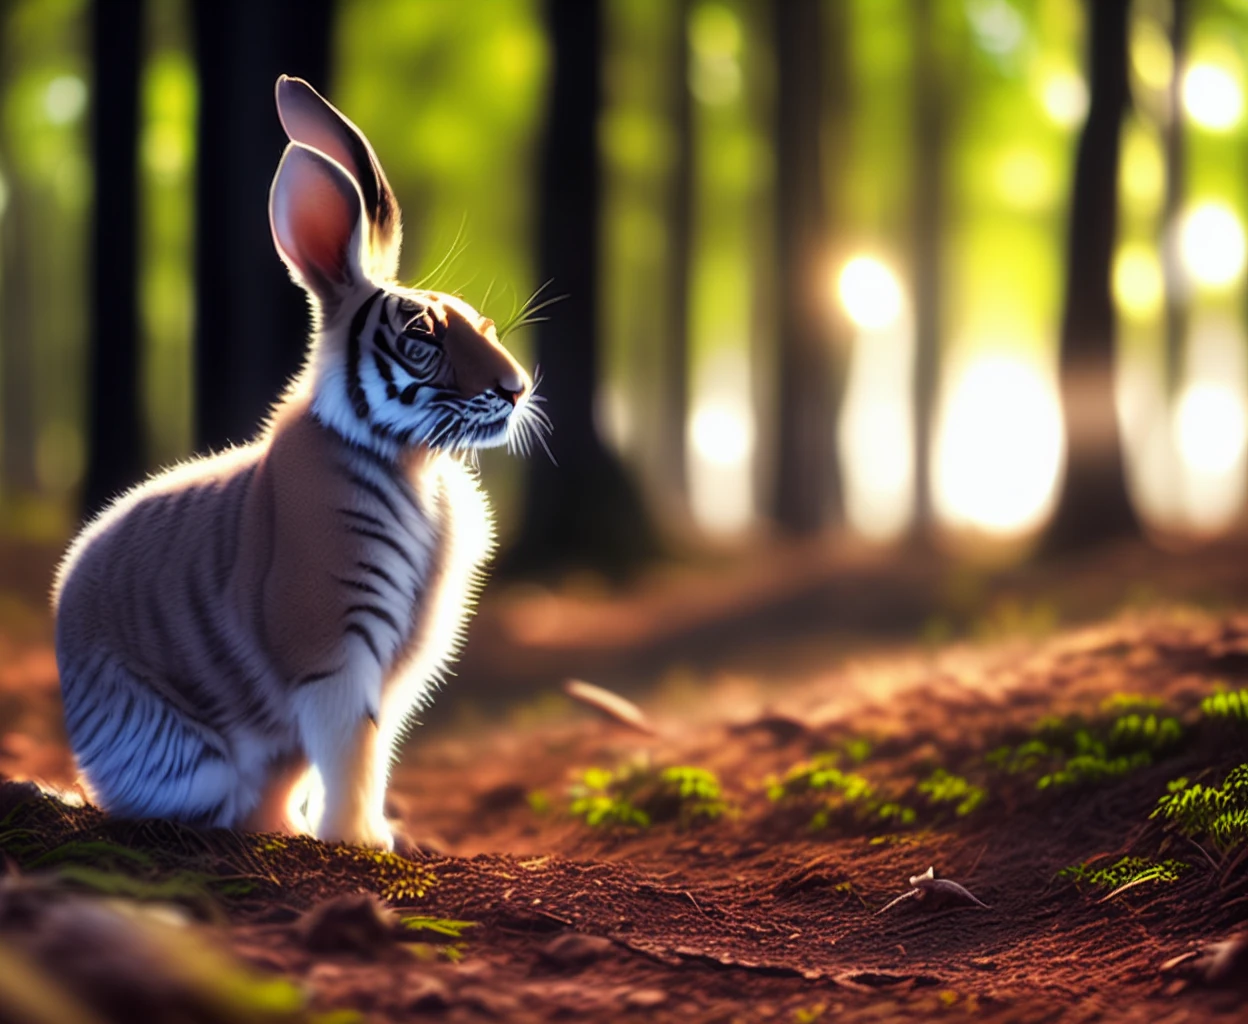 Masterpiece, best quality, 400mm, f/4, shutter speed 1/1000, ISO 3200, a [rabbit:tiger:0.6] in a forest clearing, cinematic lighting, (backlighting:1.2), (bloom:1.2), (chromatic aberration:1.2), sharp focus